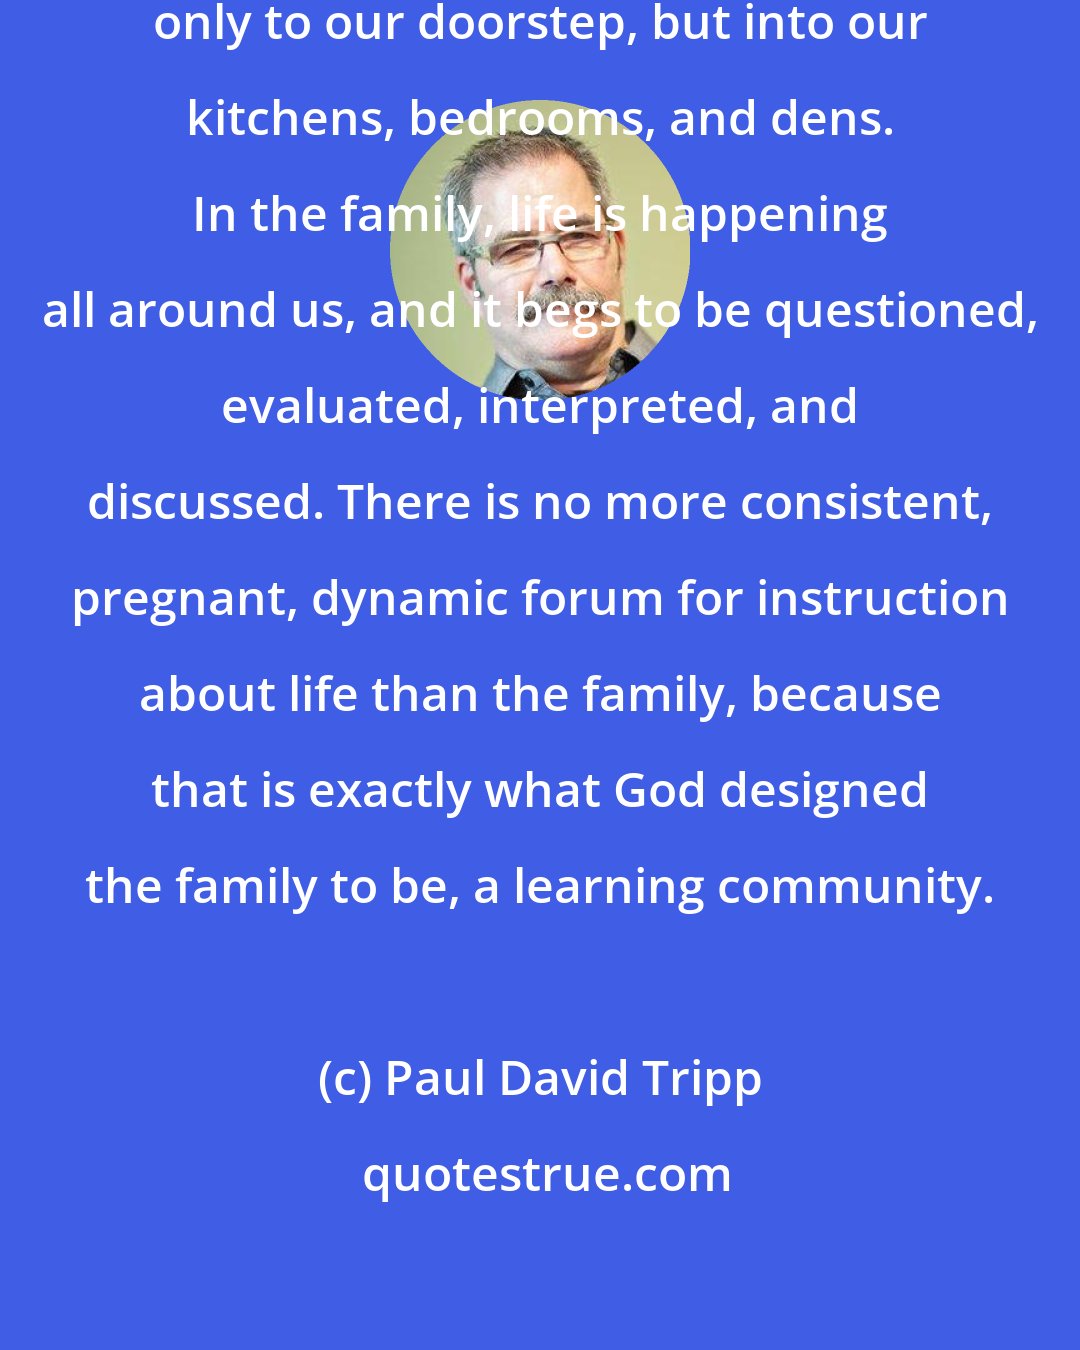 Paul David Tripp: In the family, life is brought not only to our doorstep, but into our kitchens, bedrooms, and dens. In the family, life is happening all around us, and it begs to be questioned, evaluated, interpreted, and discussed. There is no more consistent, pregnant, dynamic forum for instruction about life than the family, because that is exactly what God designed the family to be, a learning community.